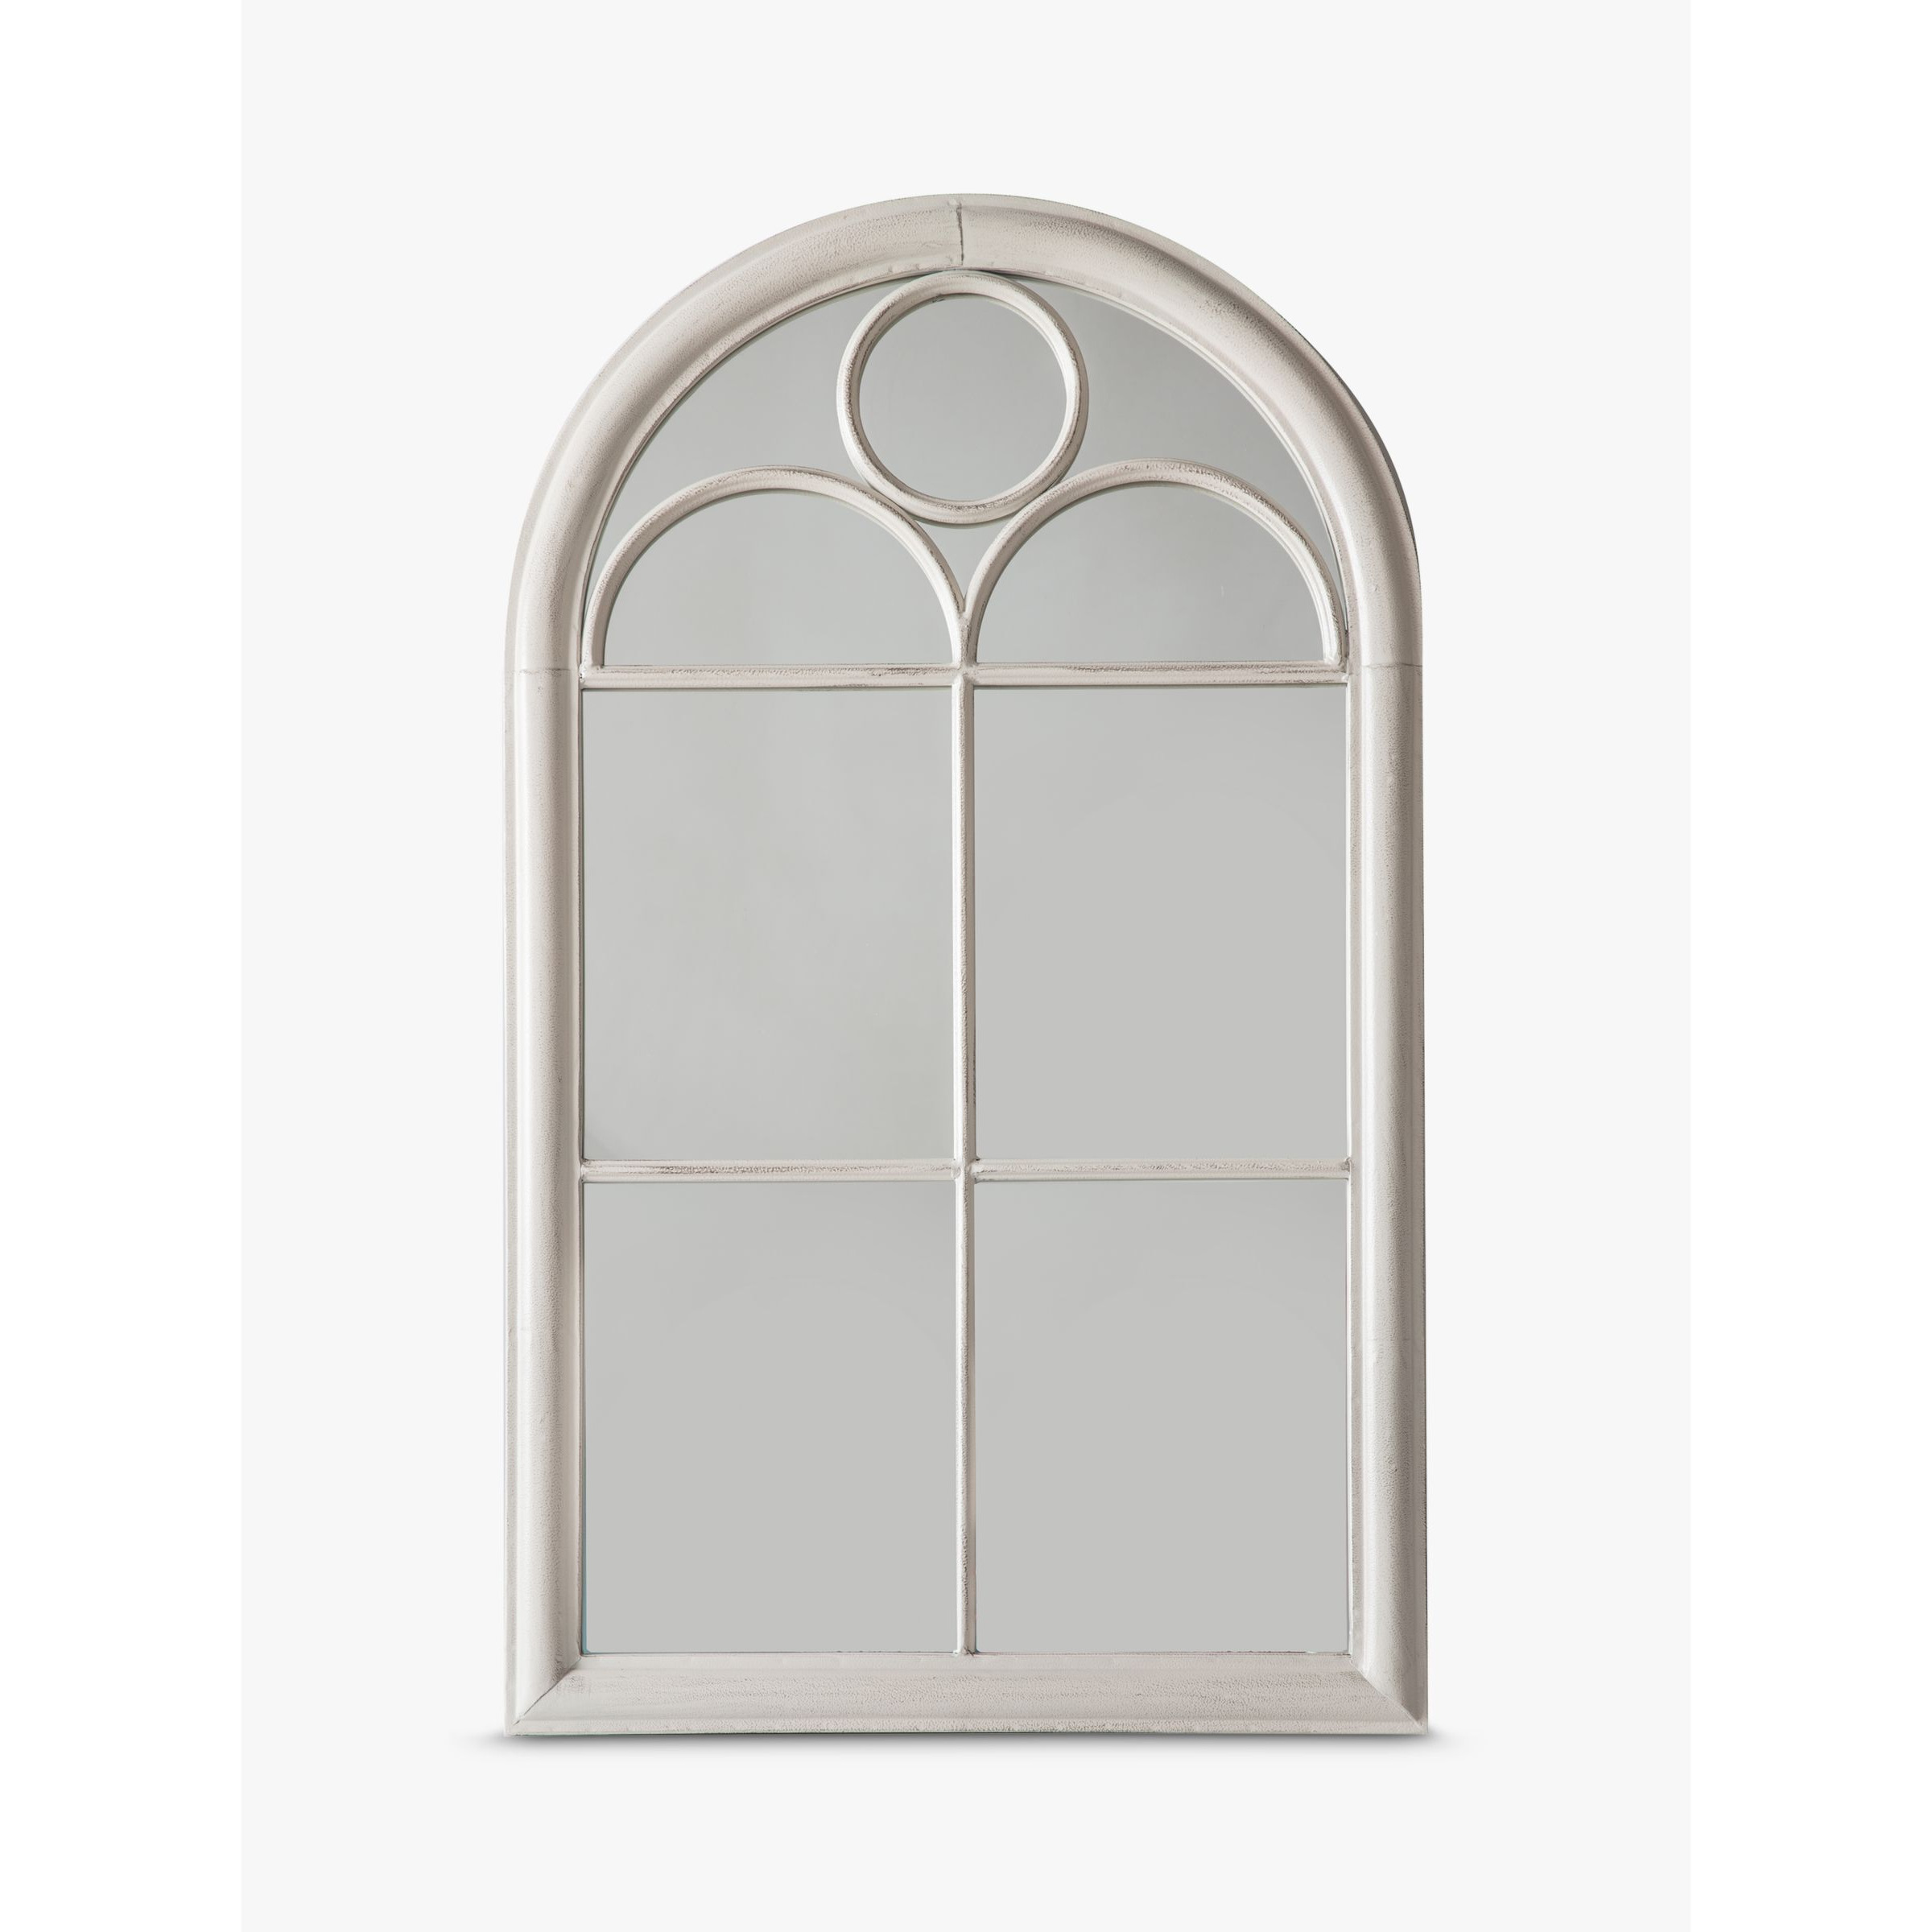 Classic Arch Window Metal Frame Indoor/Outdoor Wall Mirror, 100 x 61cm, Distressed White - image 1